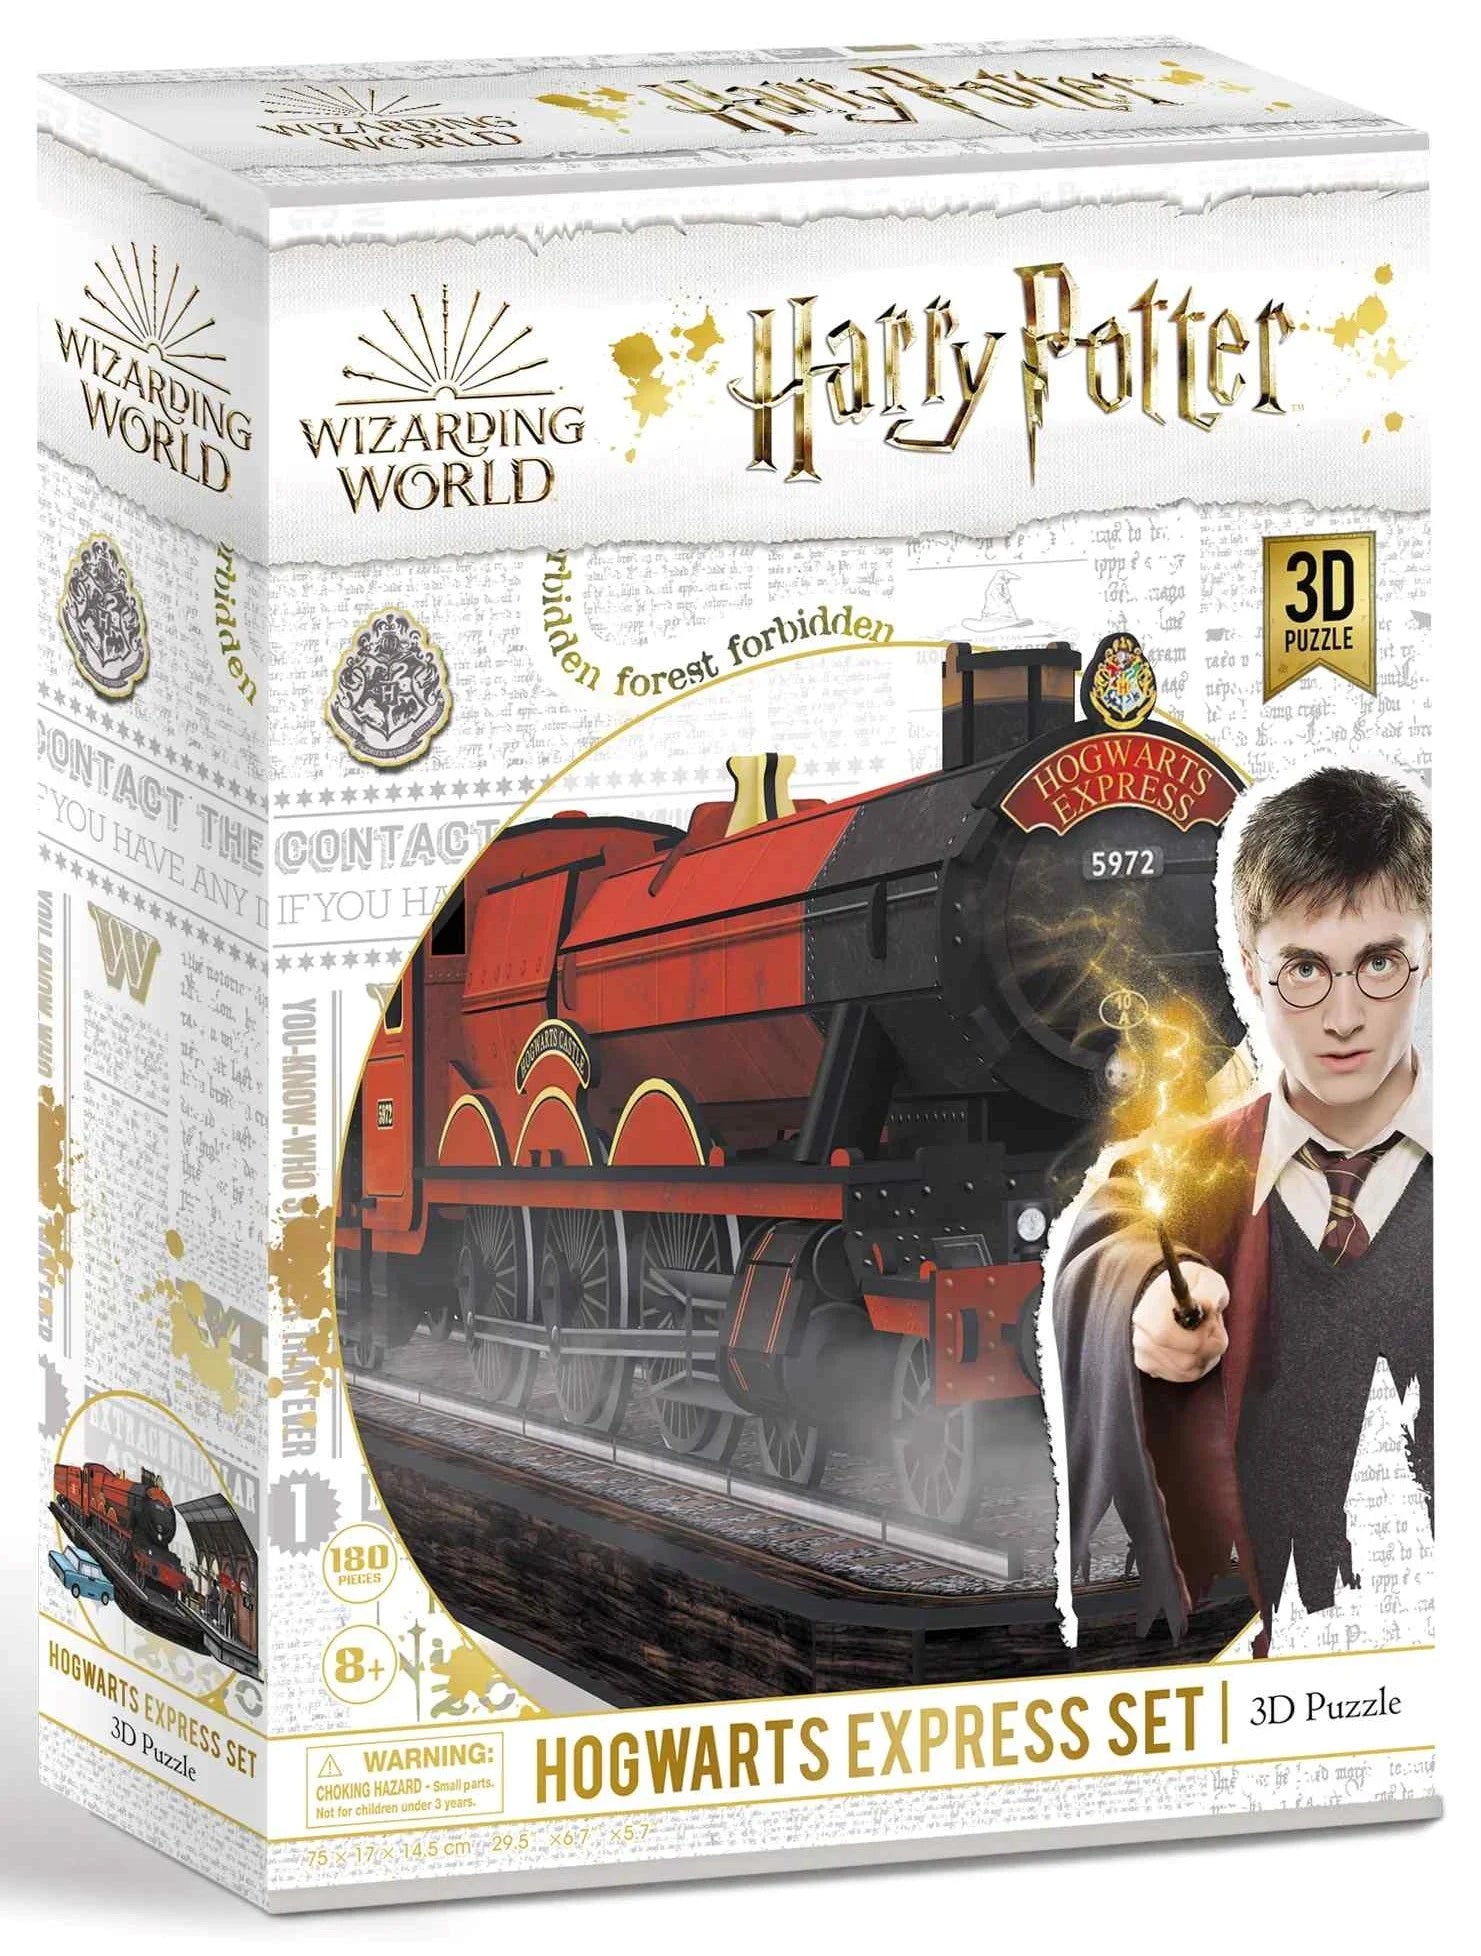 Harry Potter - The card game Clementoni UK